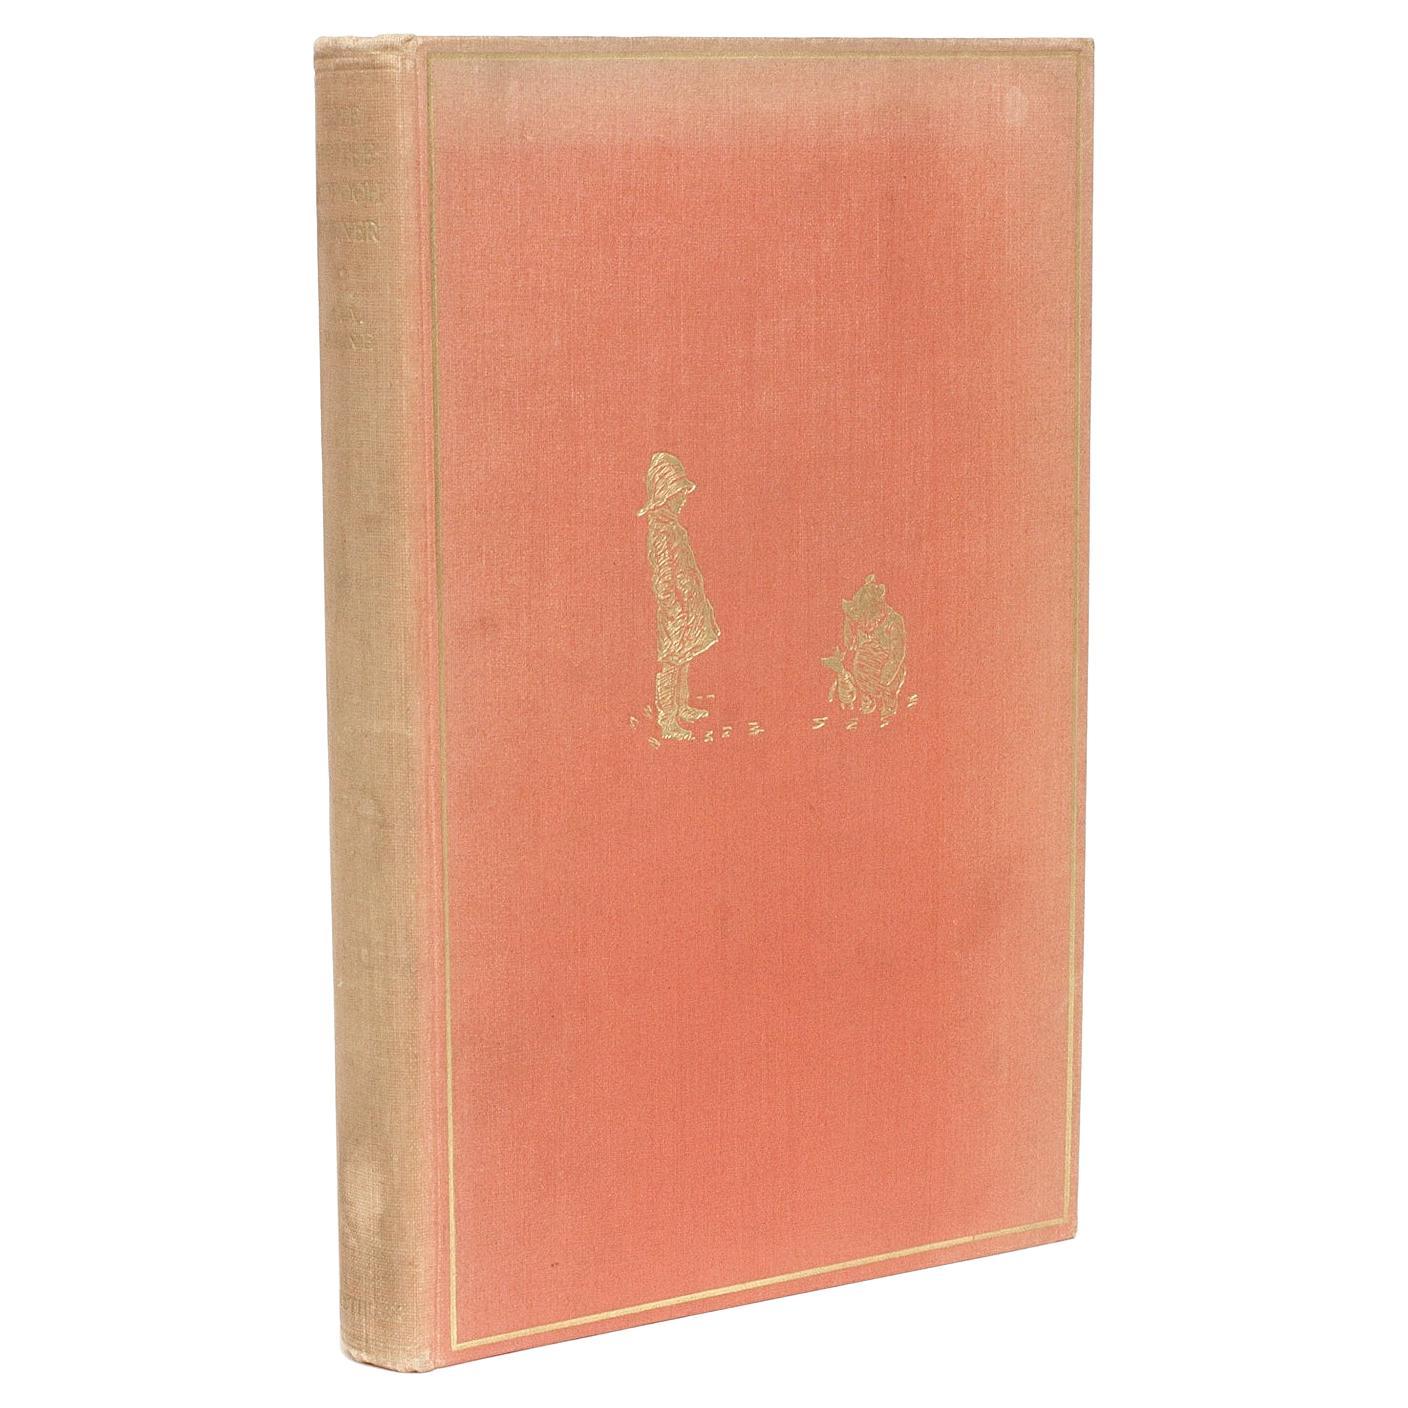 MILNE, A. A. The House at Pooh Corner, 1928, First Edition